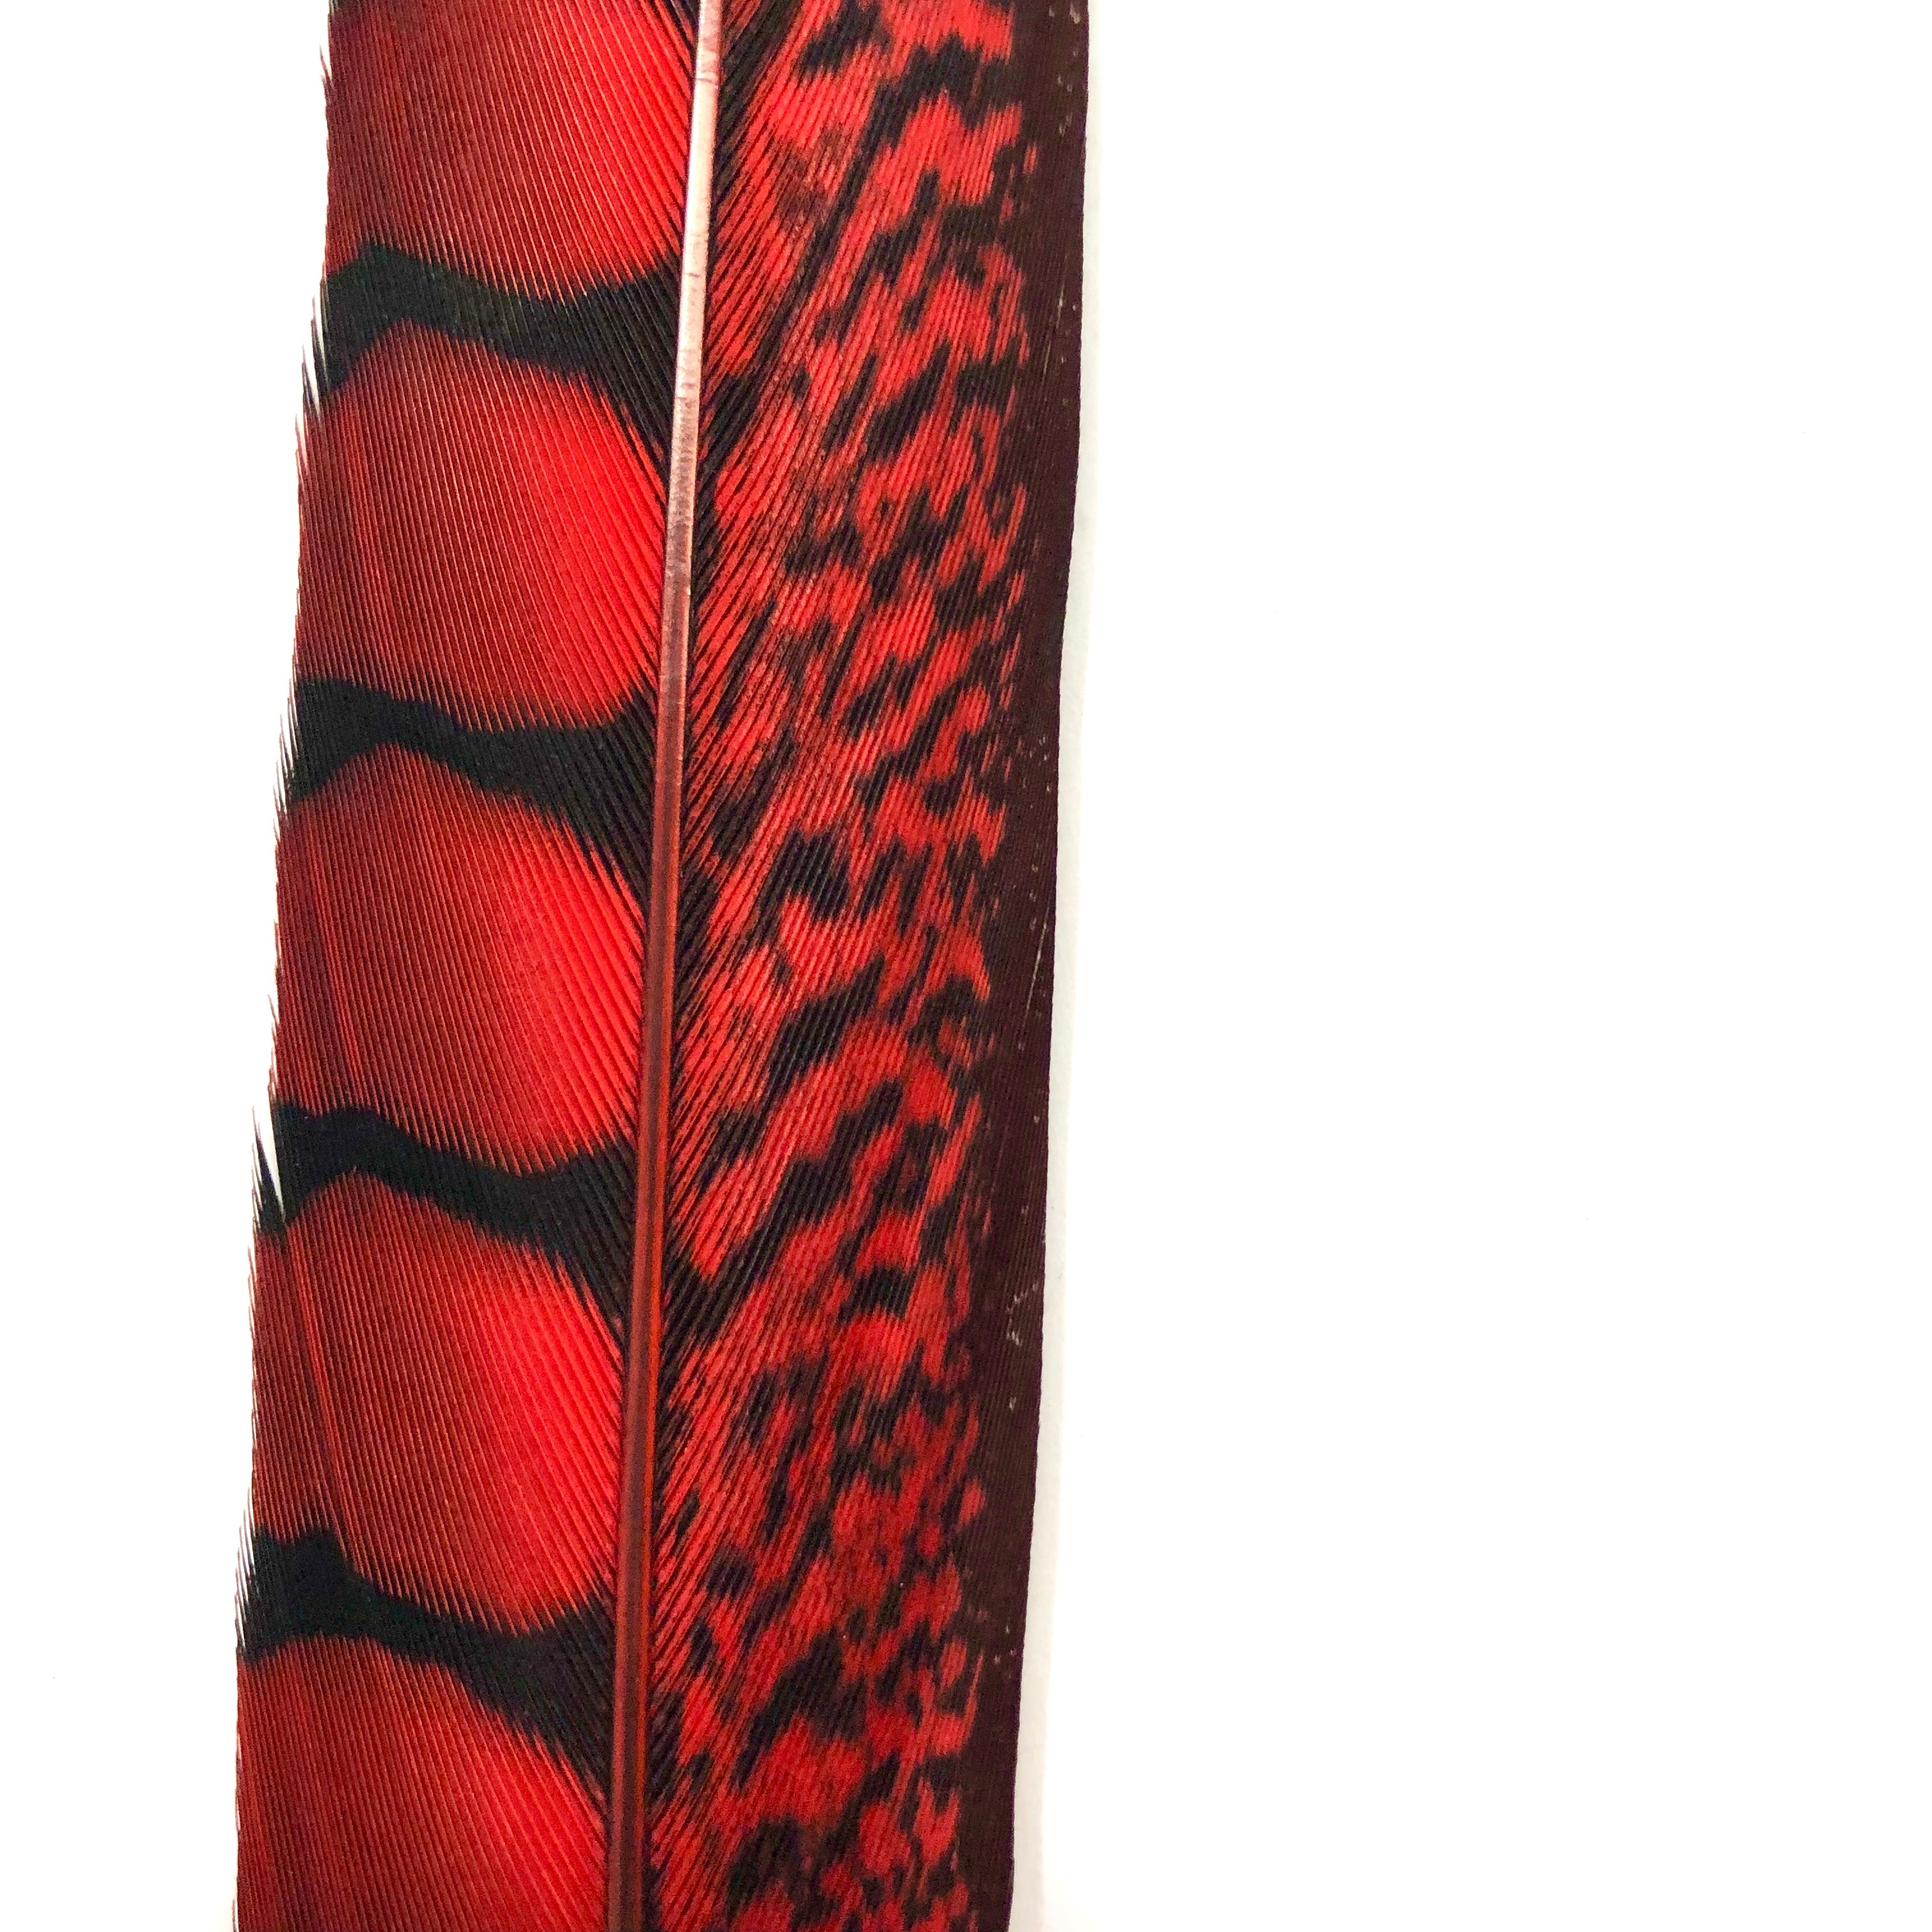 20" to 30" Lady Amherst Pheasant Side Tail Feather - Red